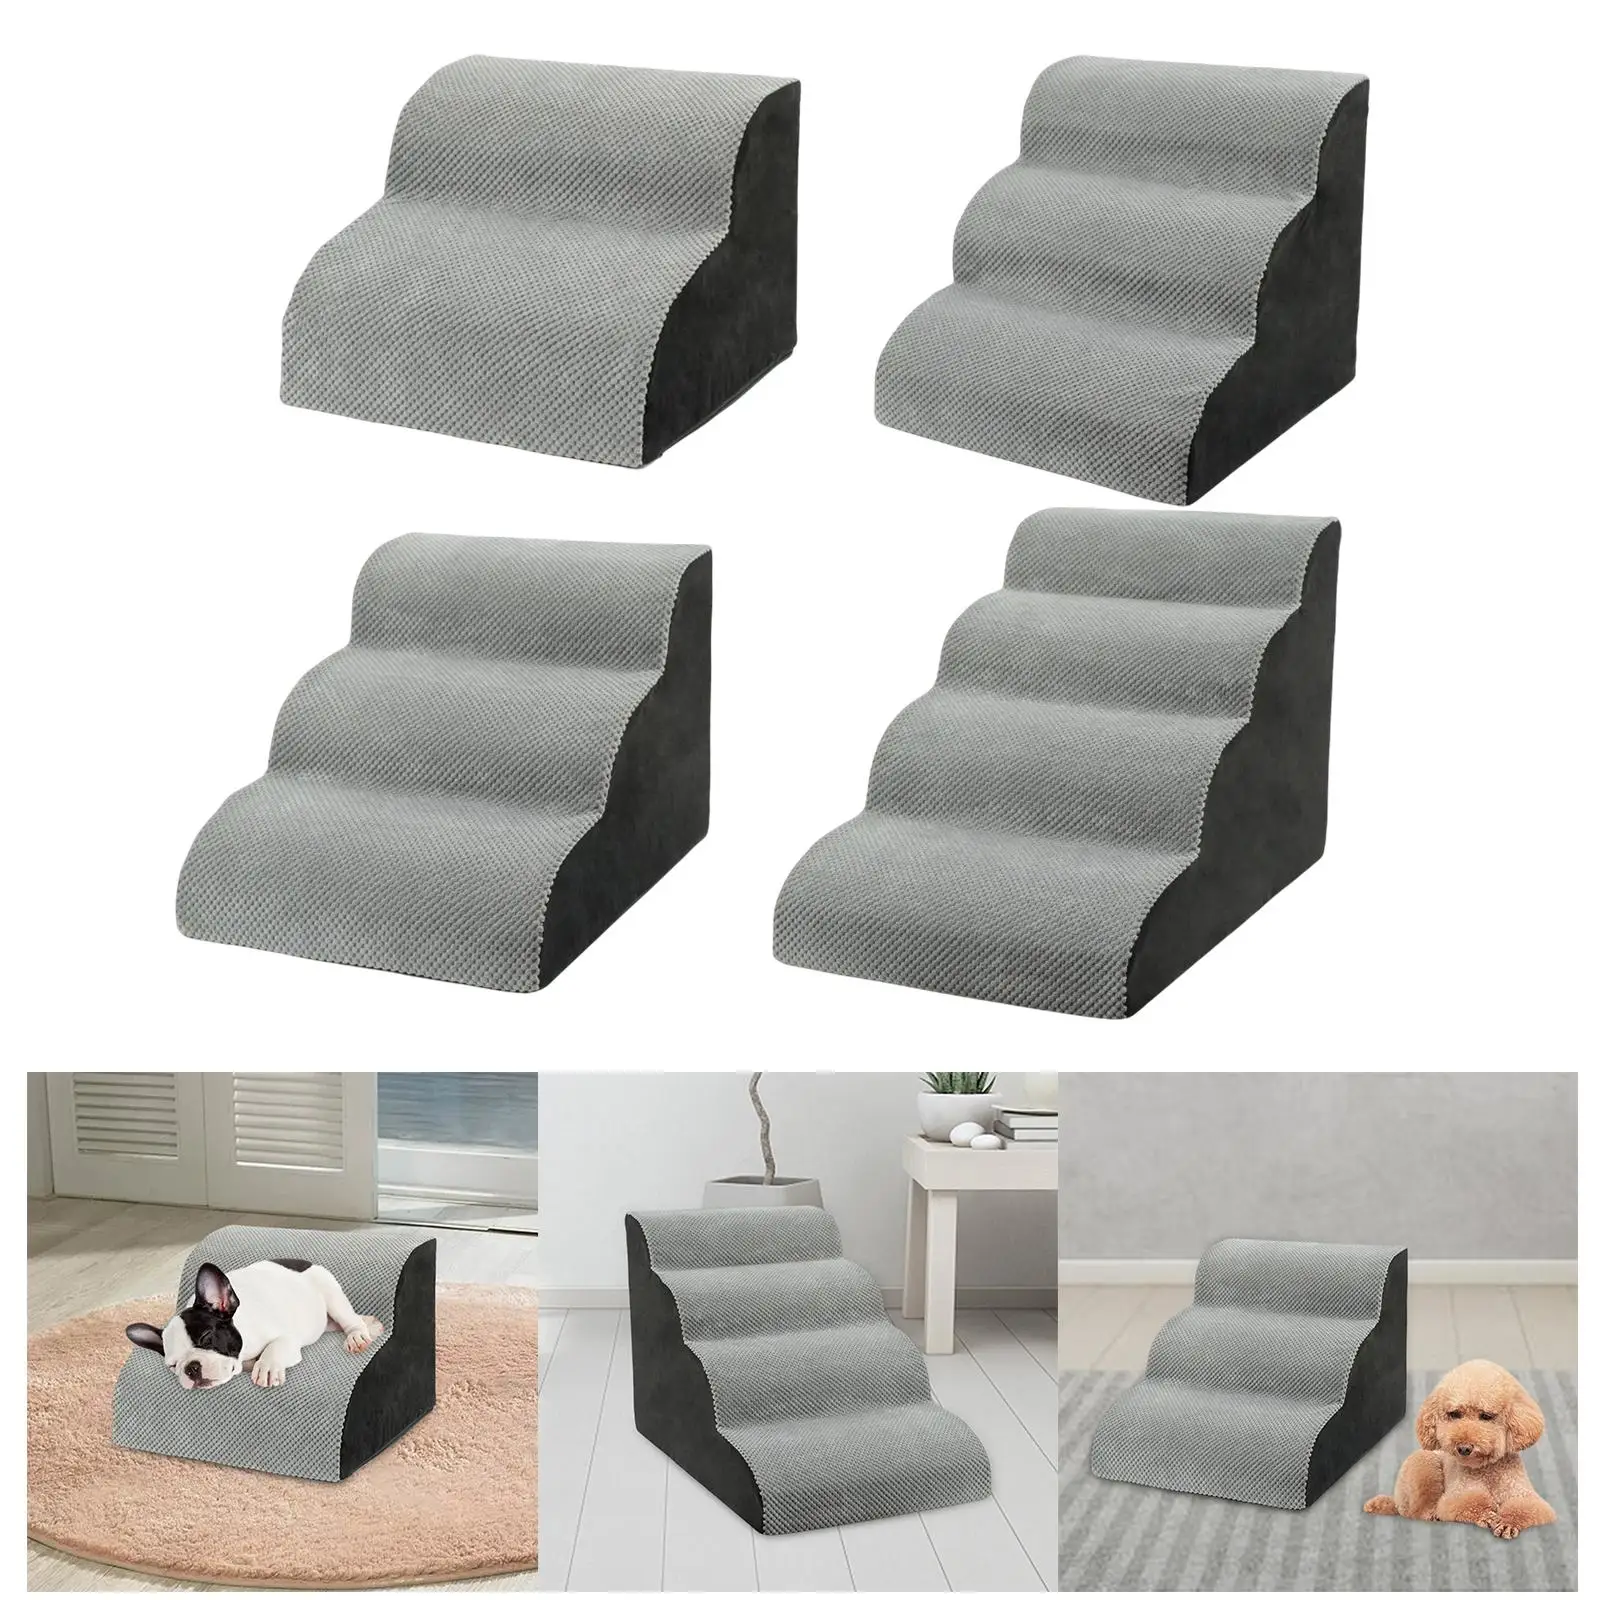 Breathable Dog Stairs Dog Ladder Ramp Climbing with Detachable Cover Slope Wide Non Slip Pet Stairs Older Dogs Elder Pets